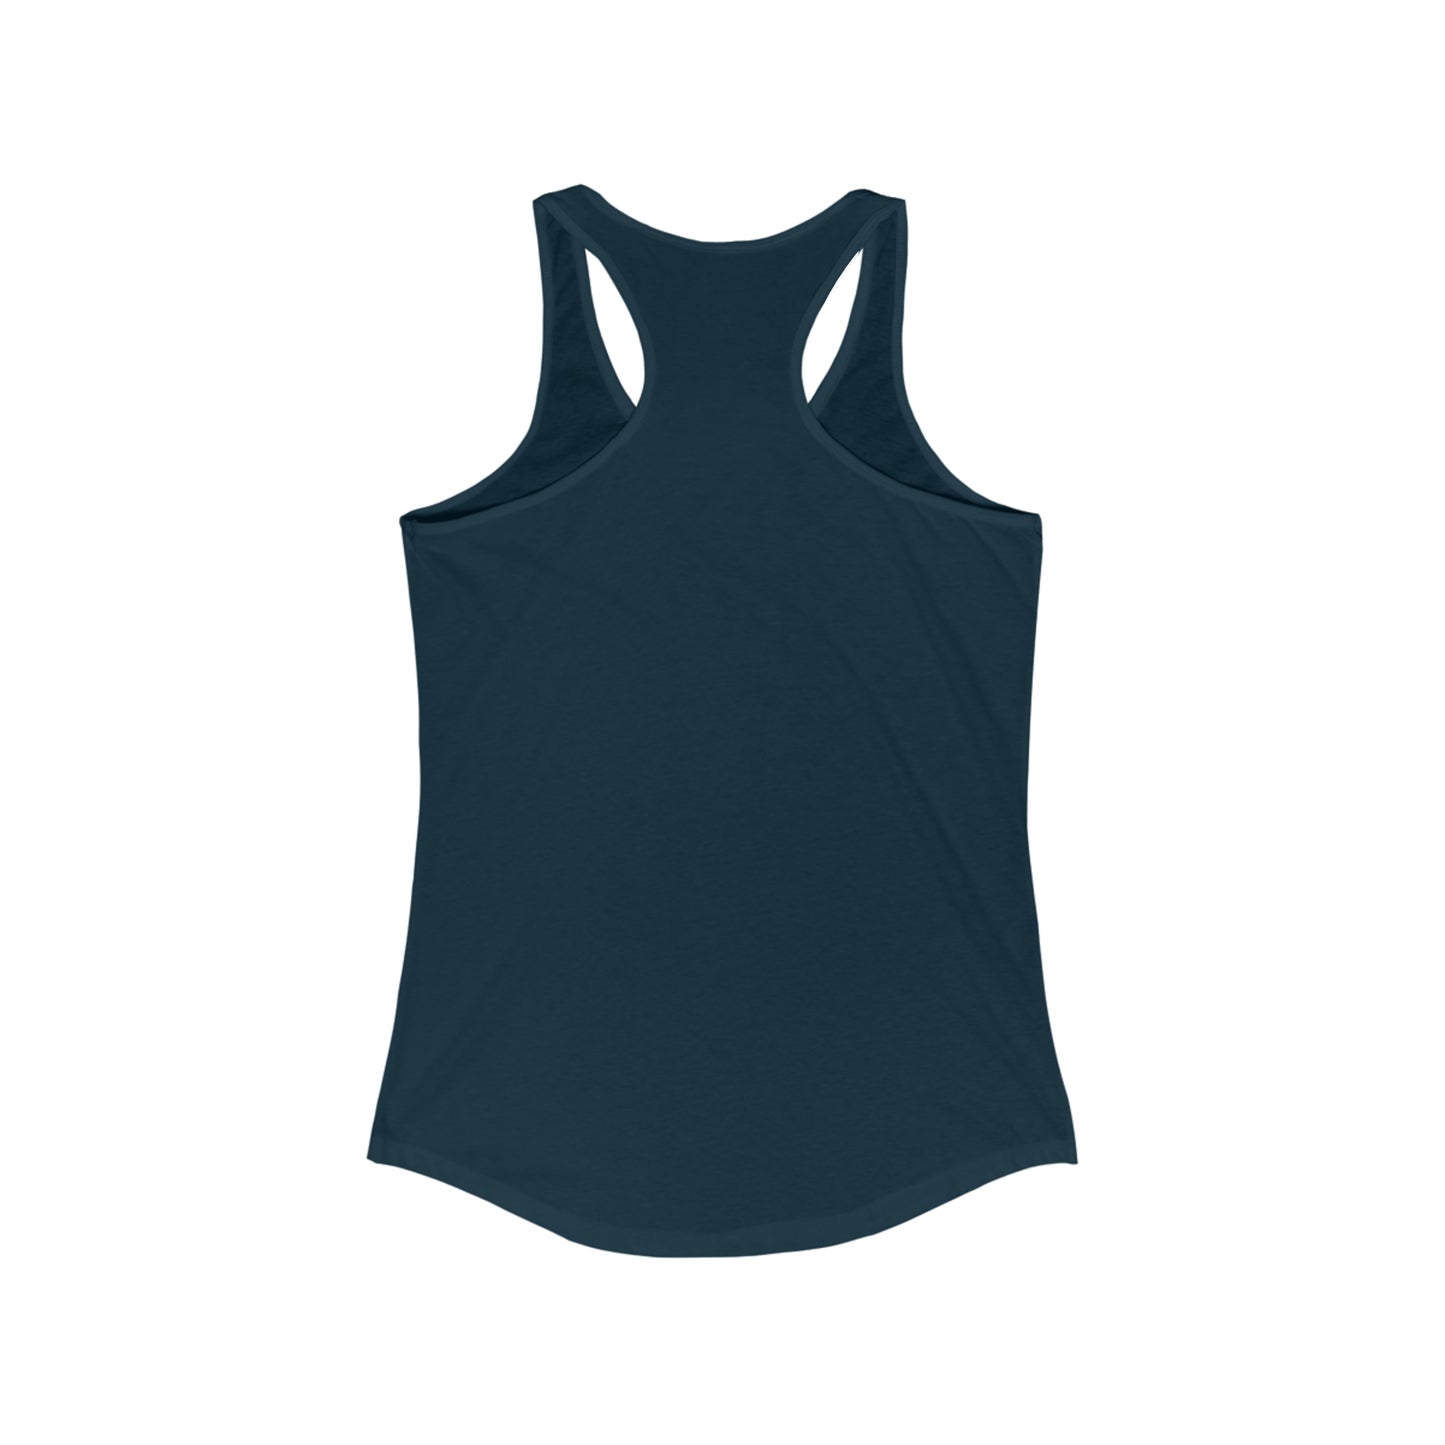 All About That Base - Women's Ideal Racerback Tank